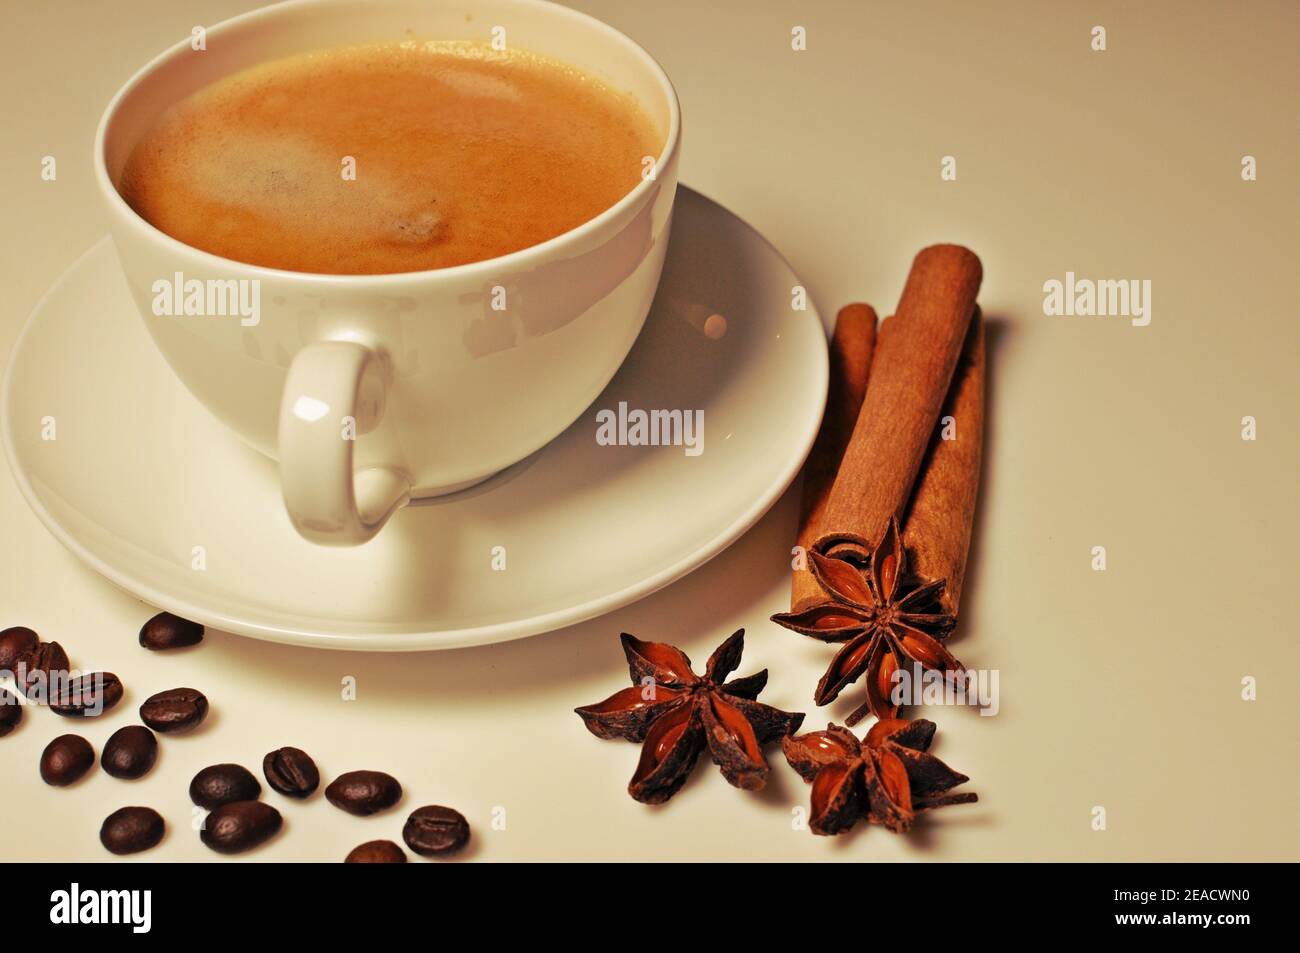 Cup of hot coffee with cinnamon, coffee beans and anise star decoration on white table background. Filter applied, side view Stock Photo